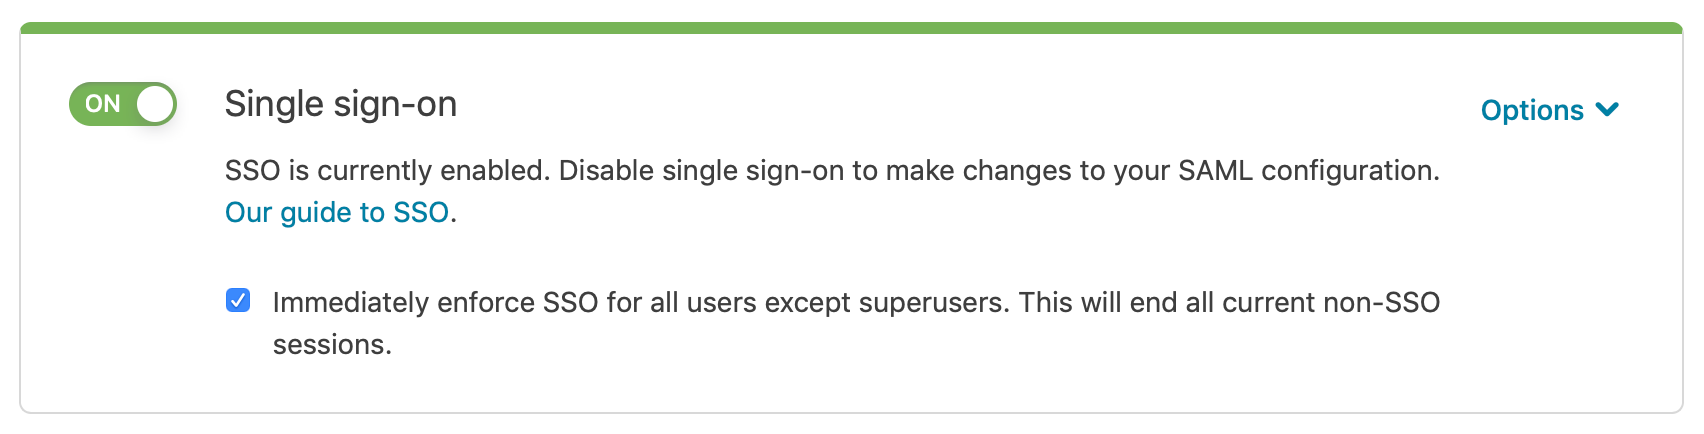 the "Single sign-on" control and the "enforce SSO" control on the single sign-on page in the account settings